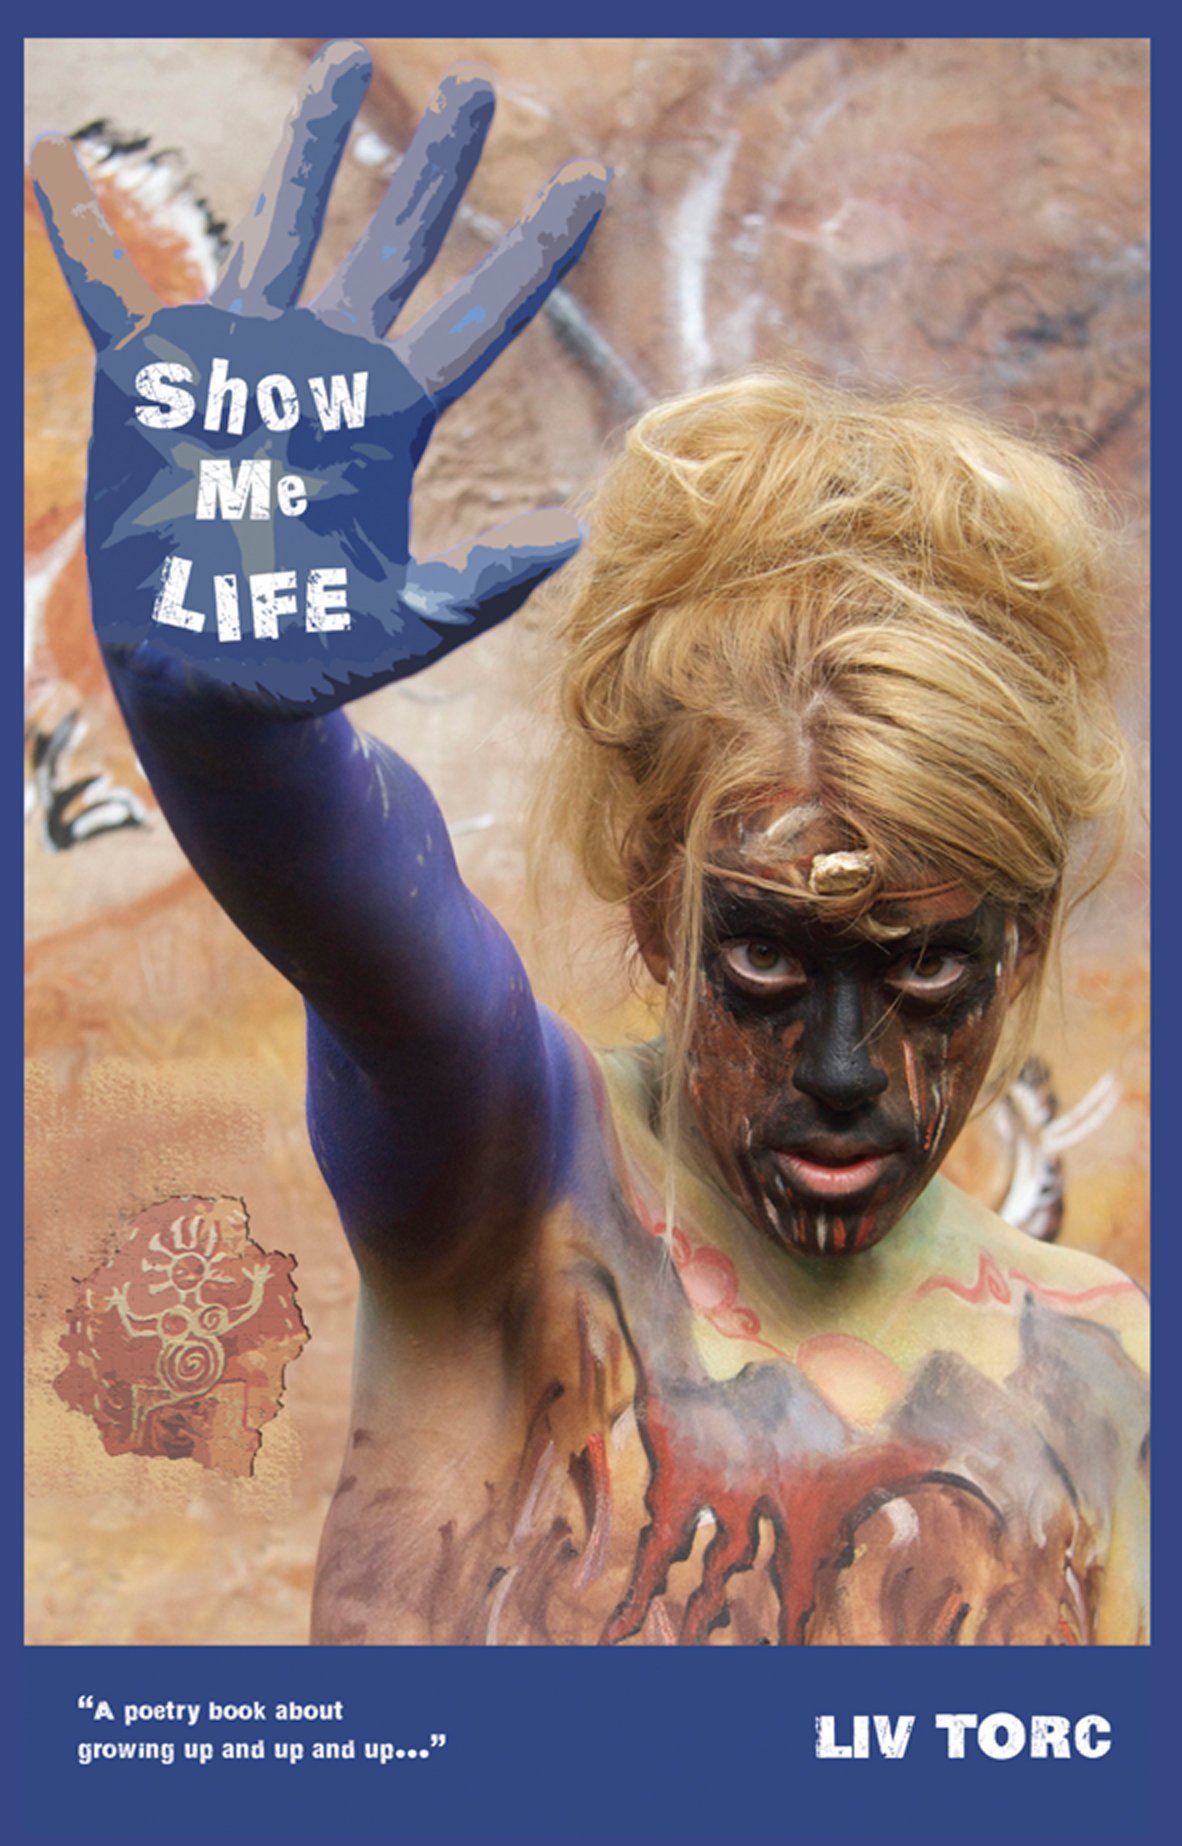 Image of Show Me Life by Liv Torc